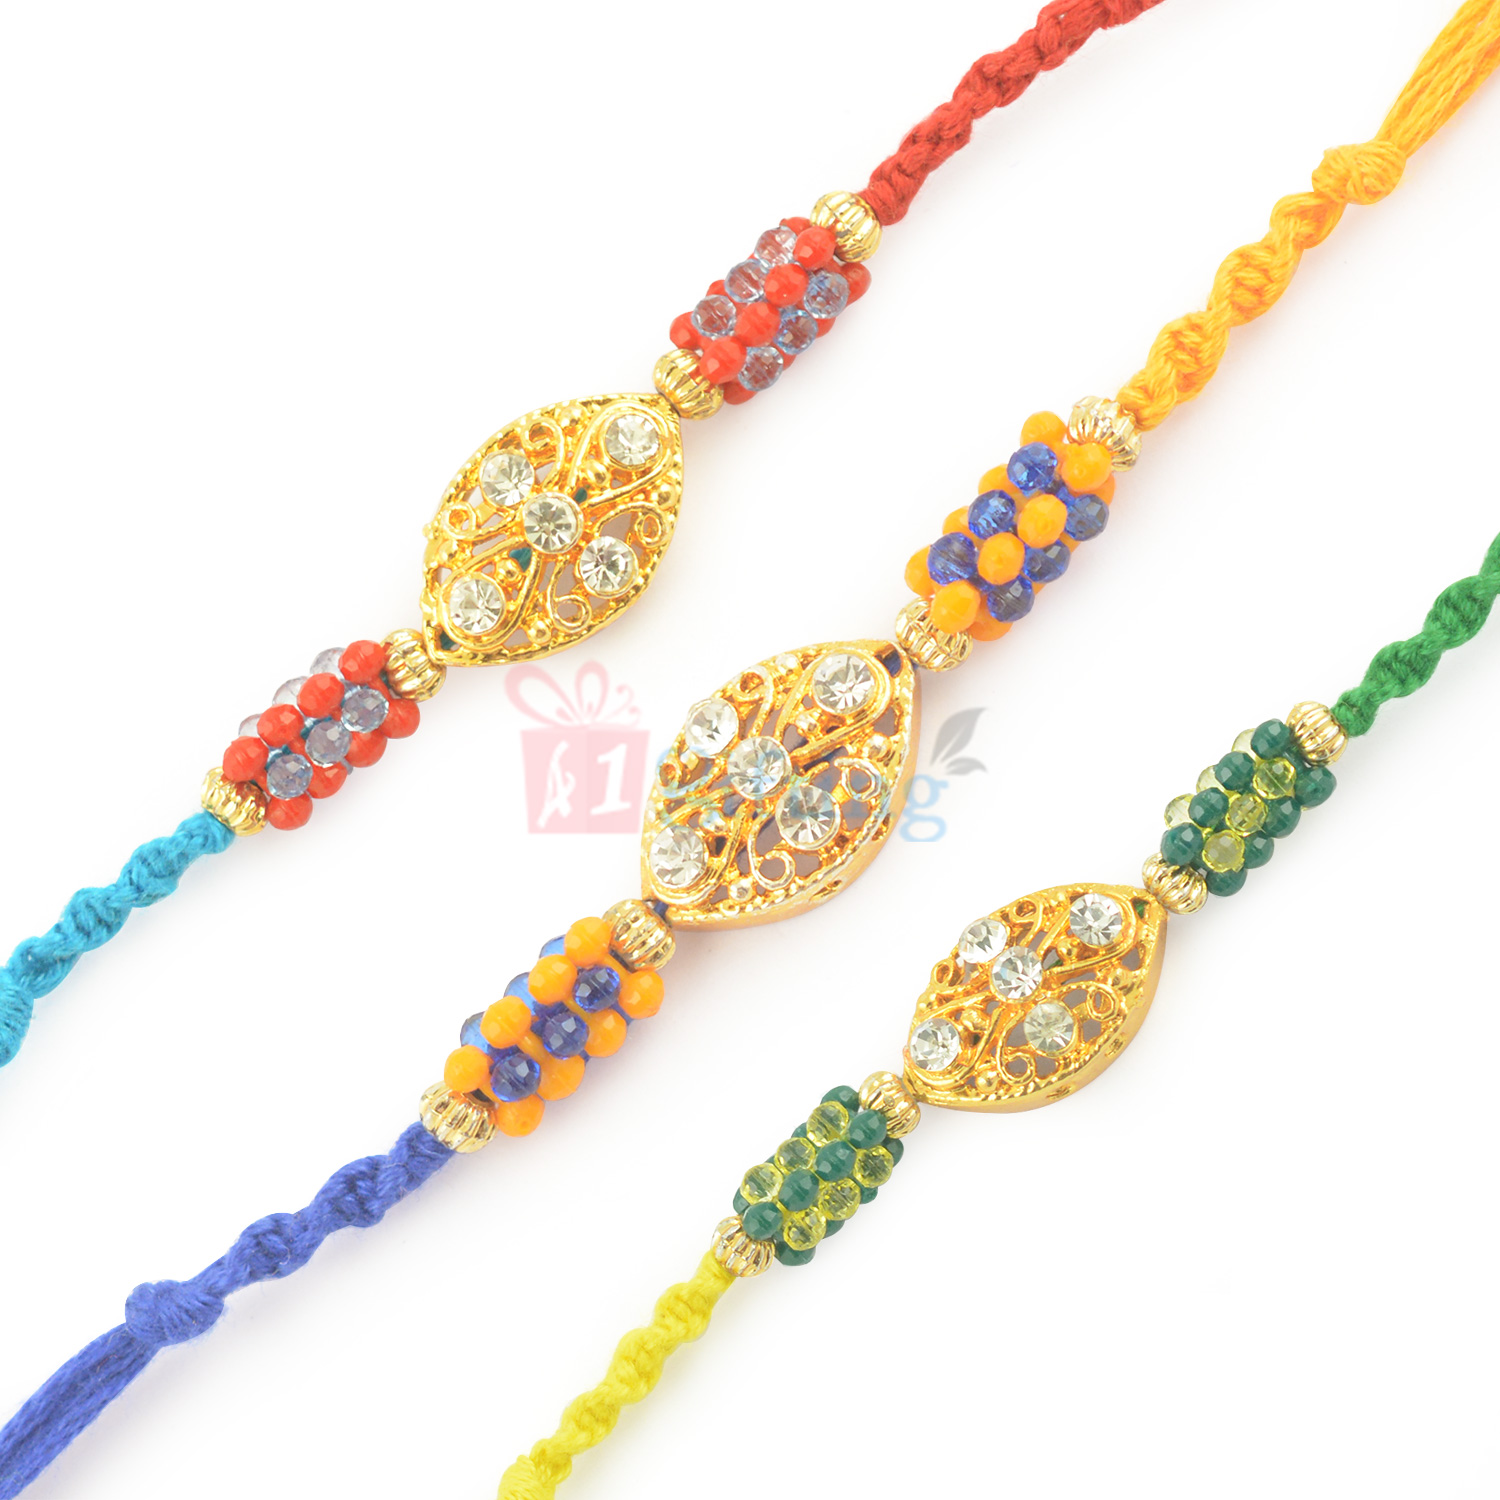 Good Looking Colorful Range of Diamond and Stone Beads